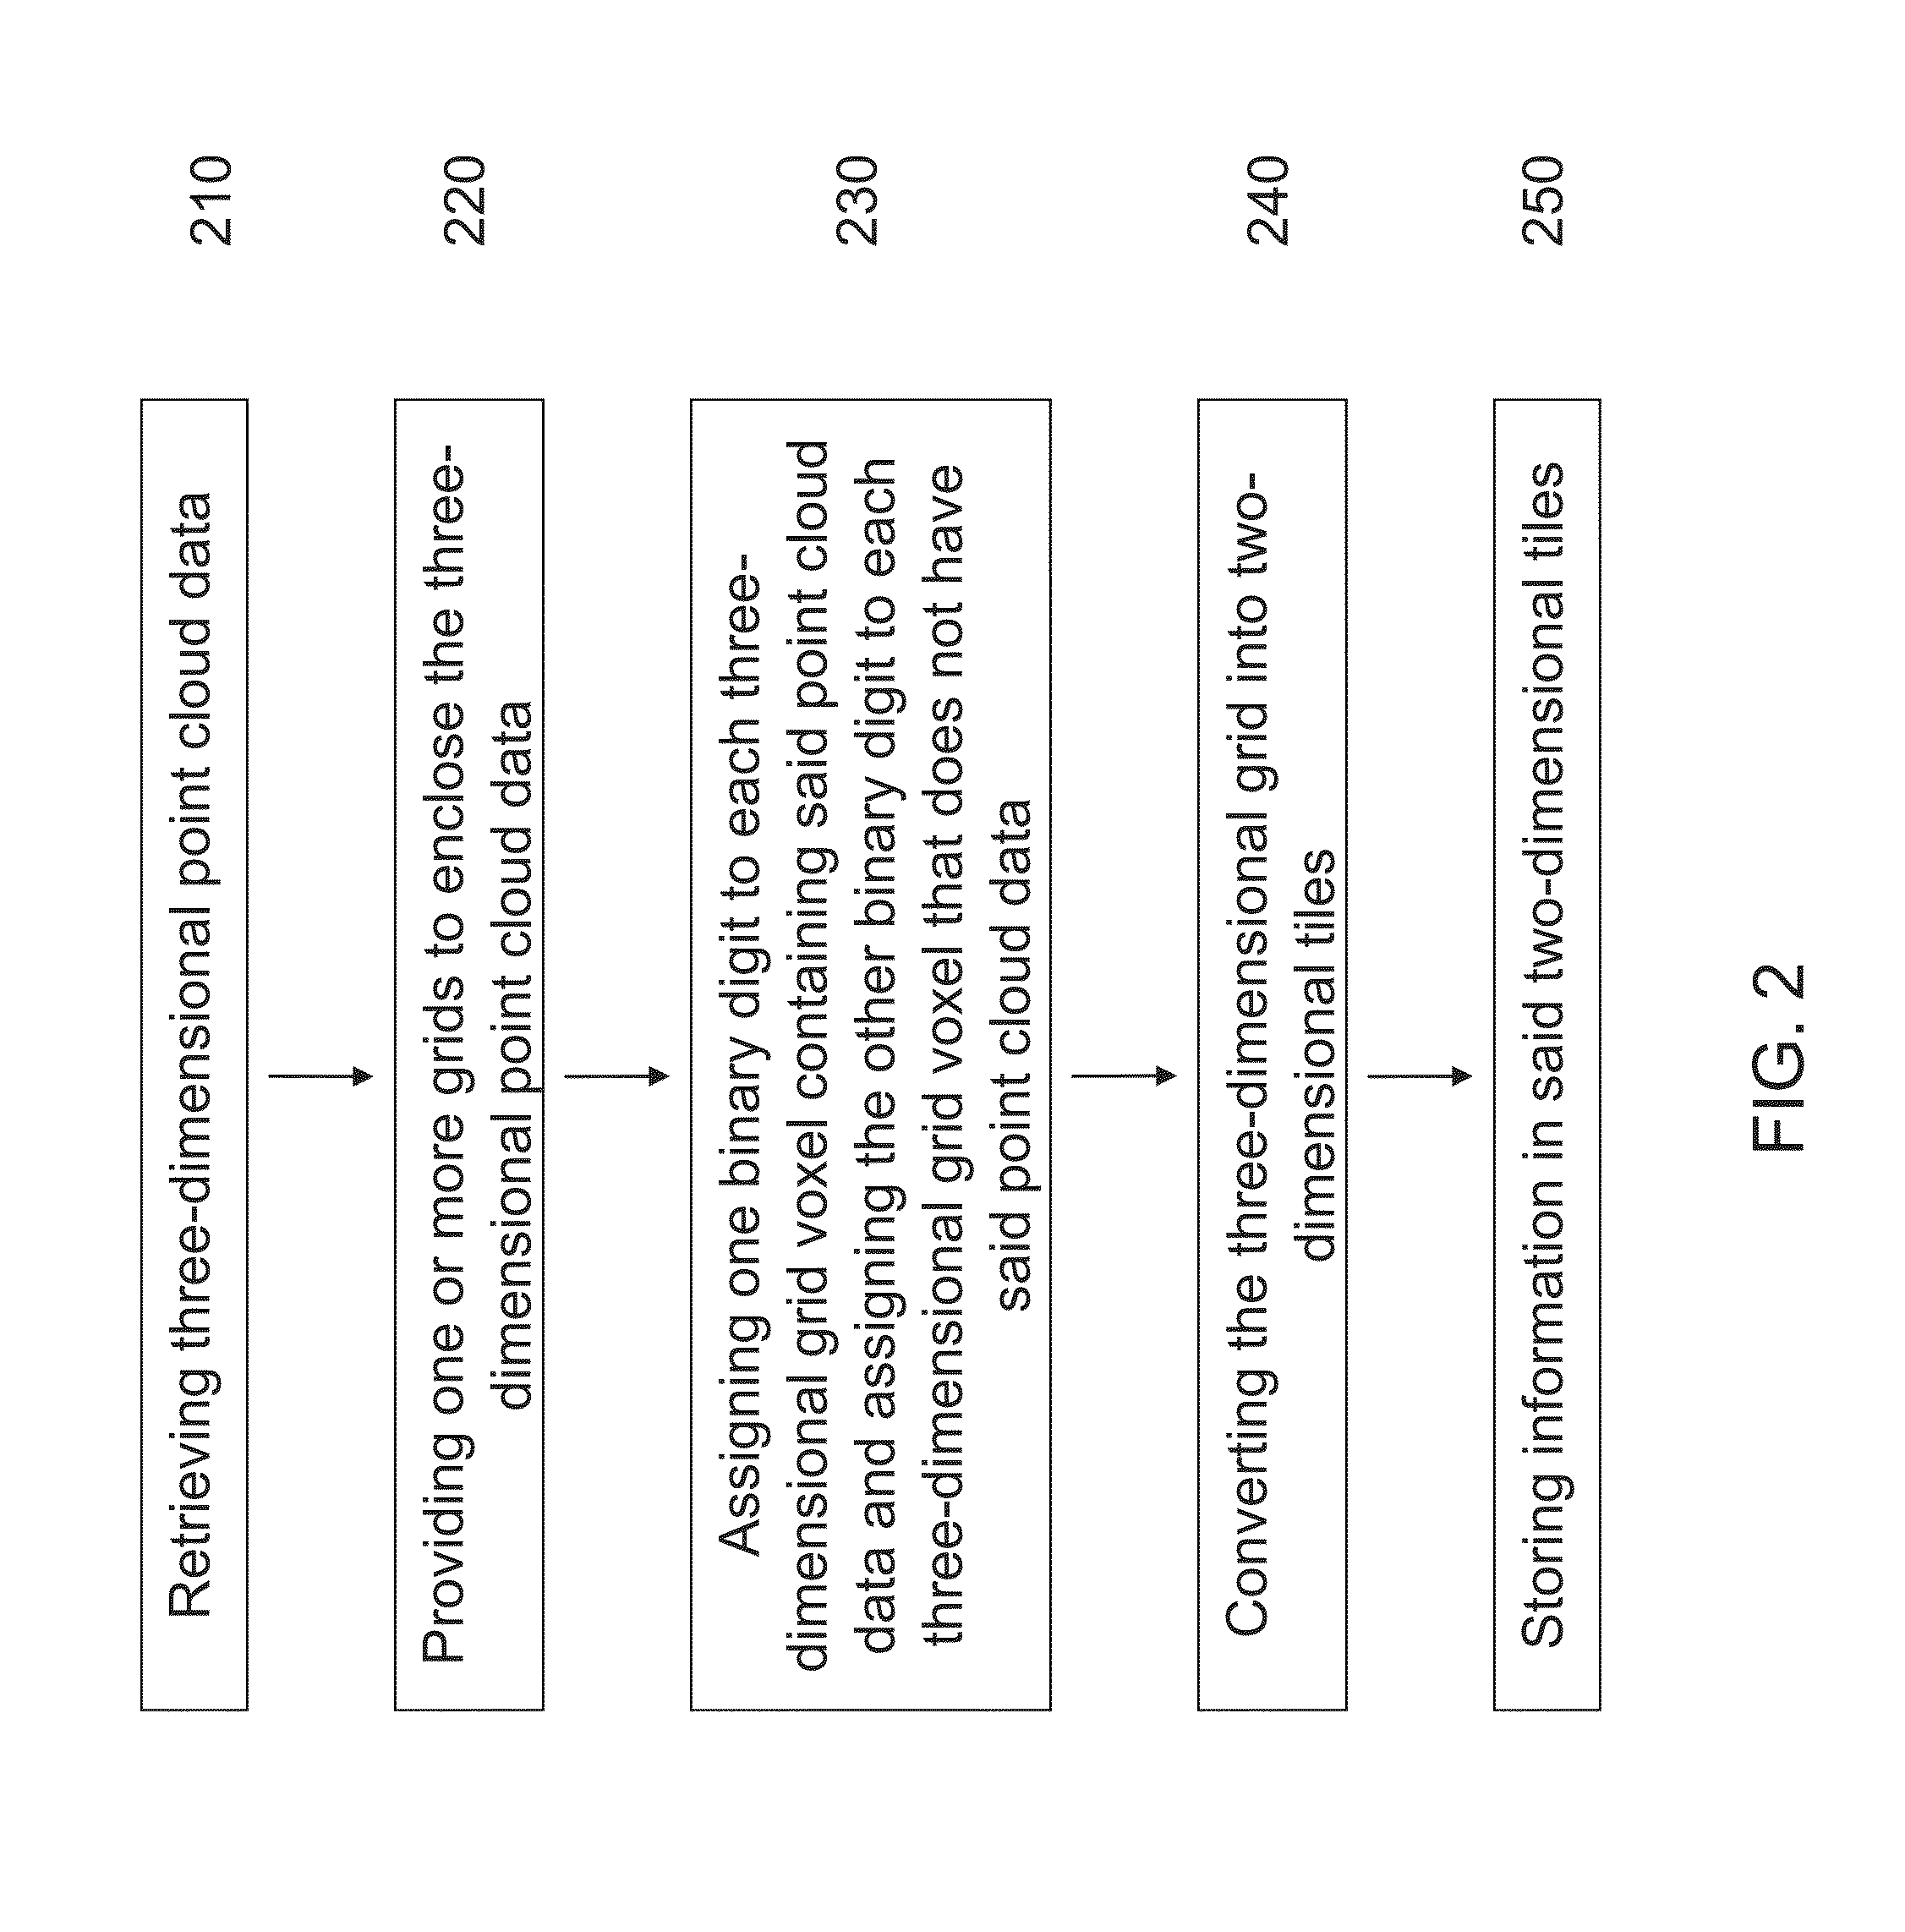 Method and apparatus for compressing three-dimensional point cloud data